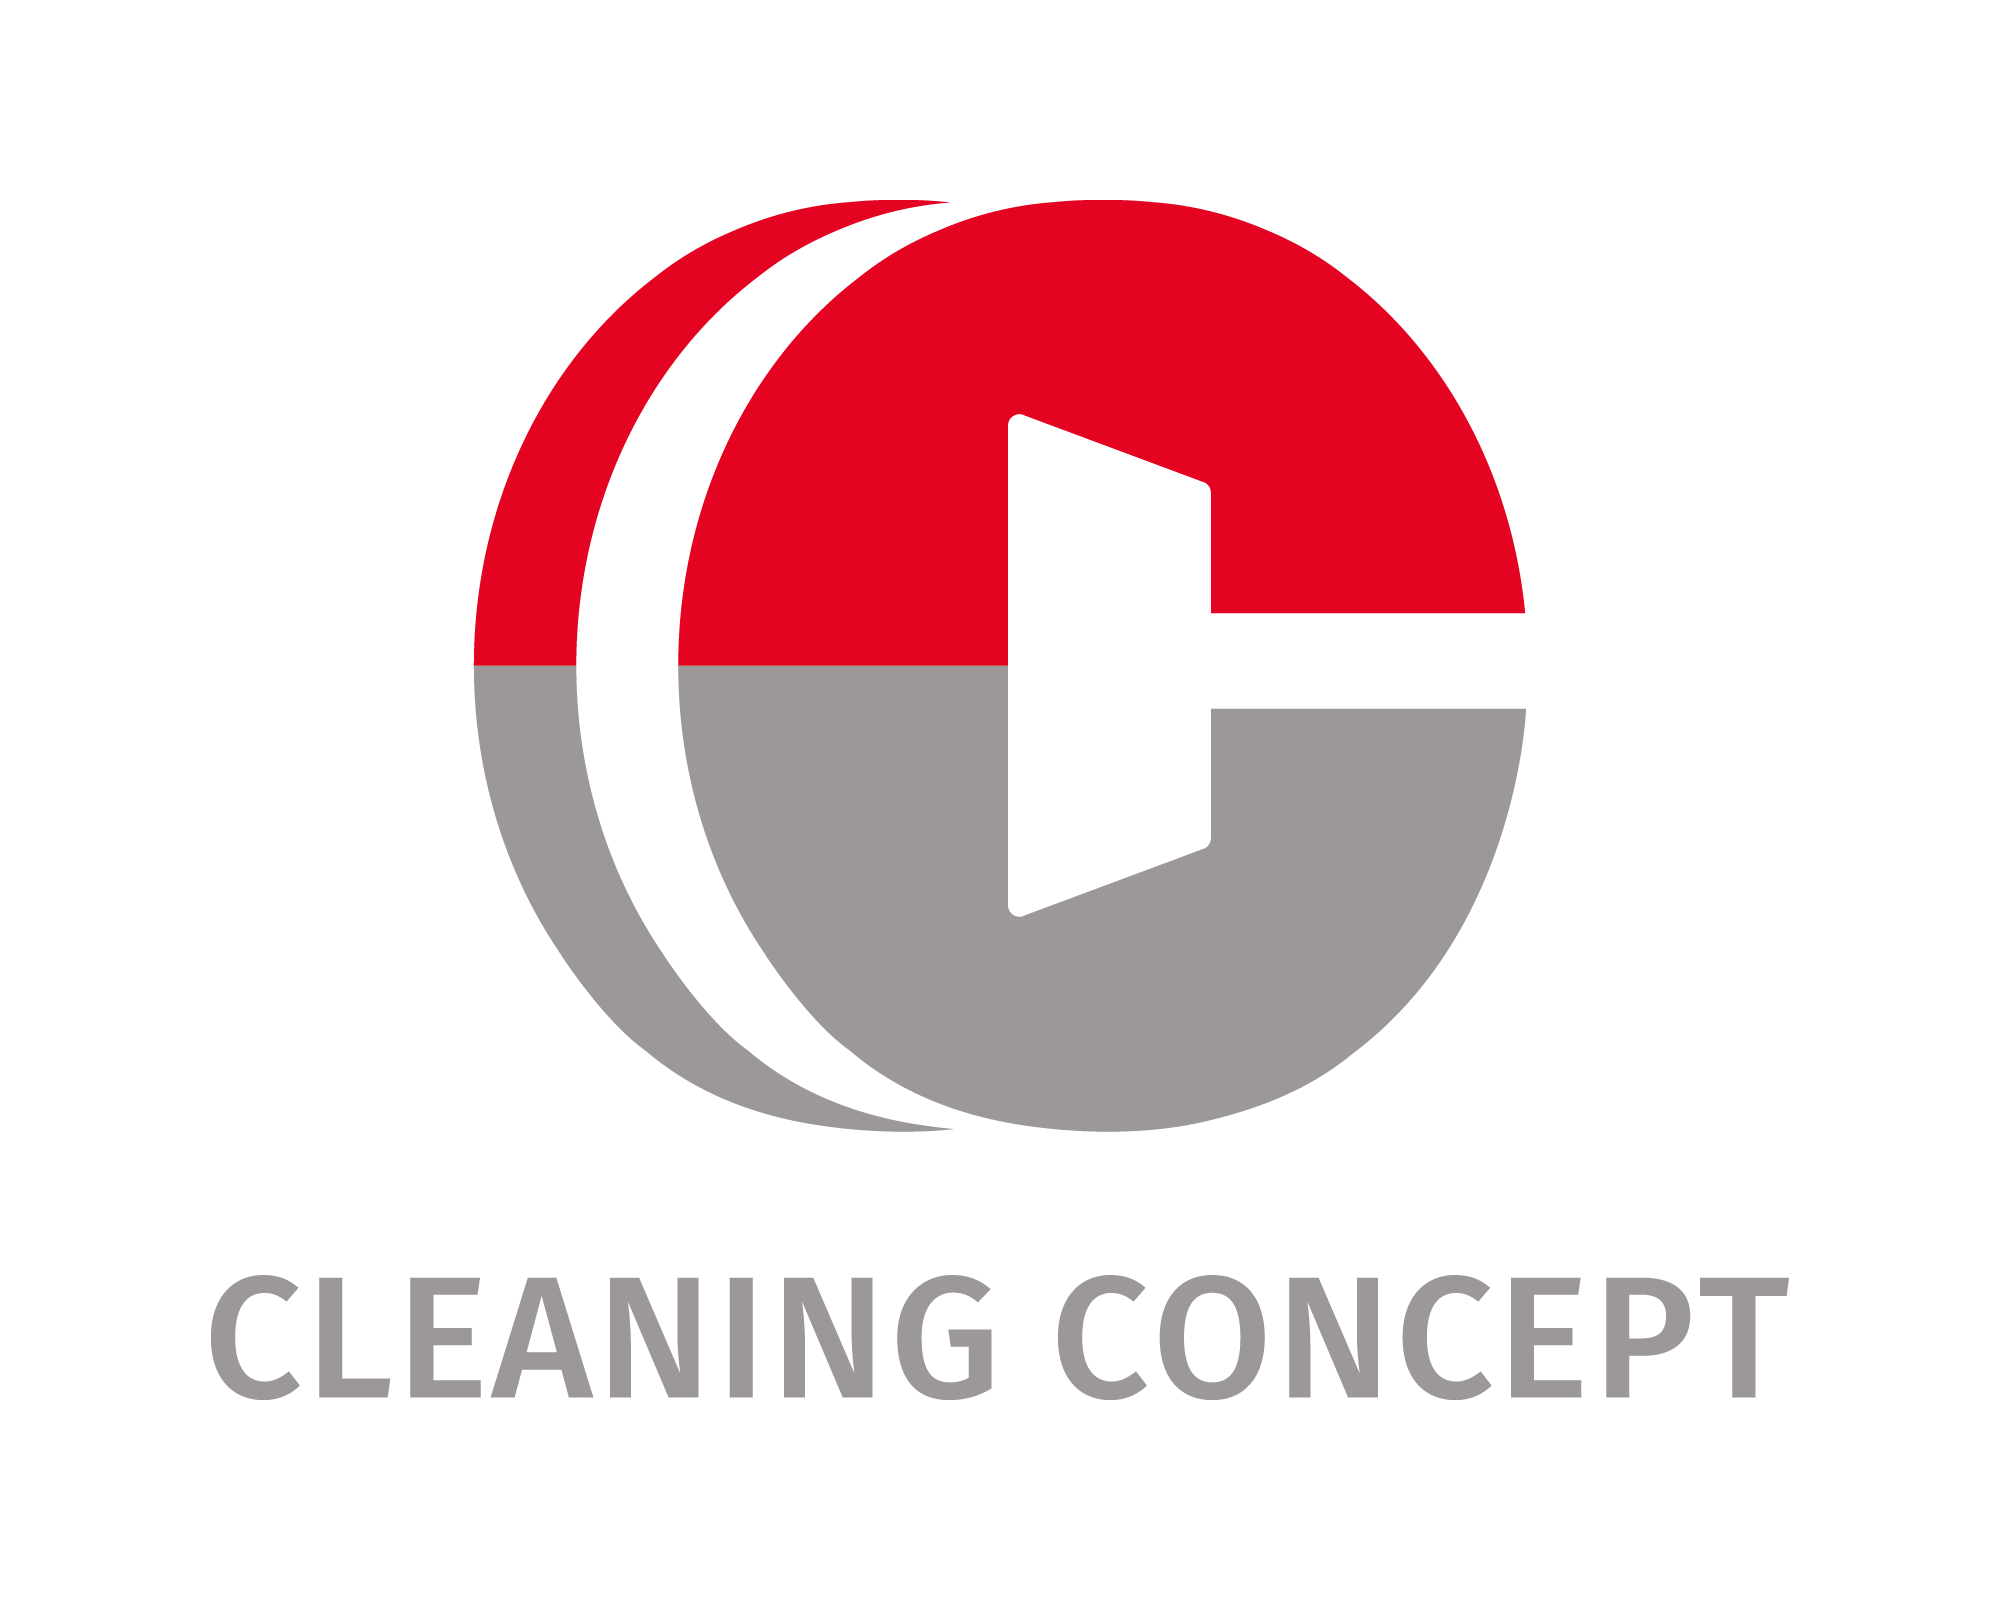 Cleaning Concept Pte. Ltd. logo